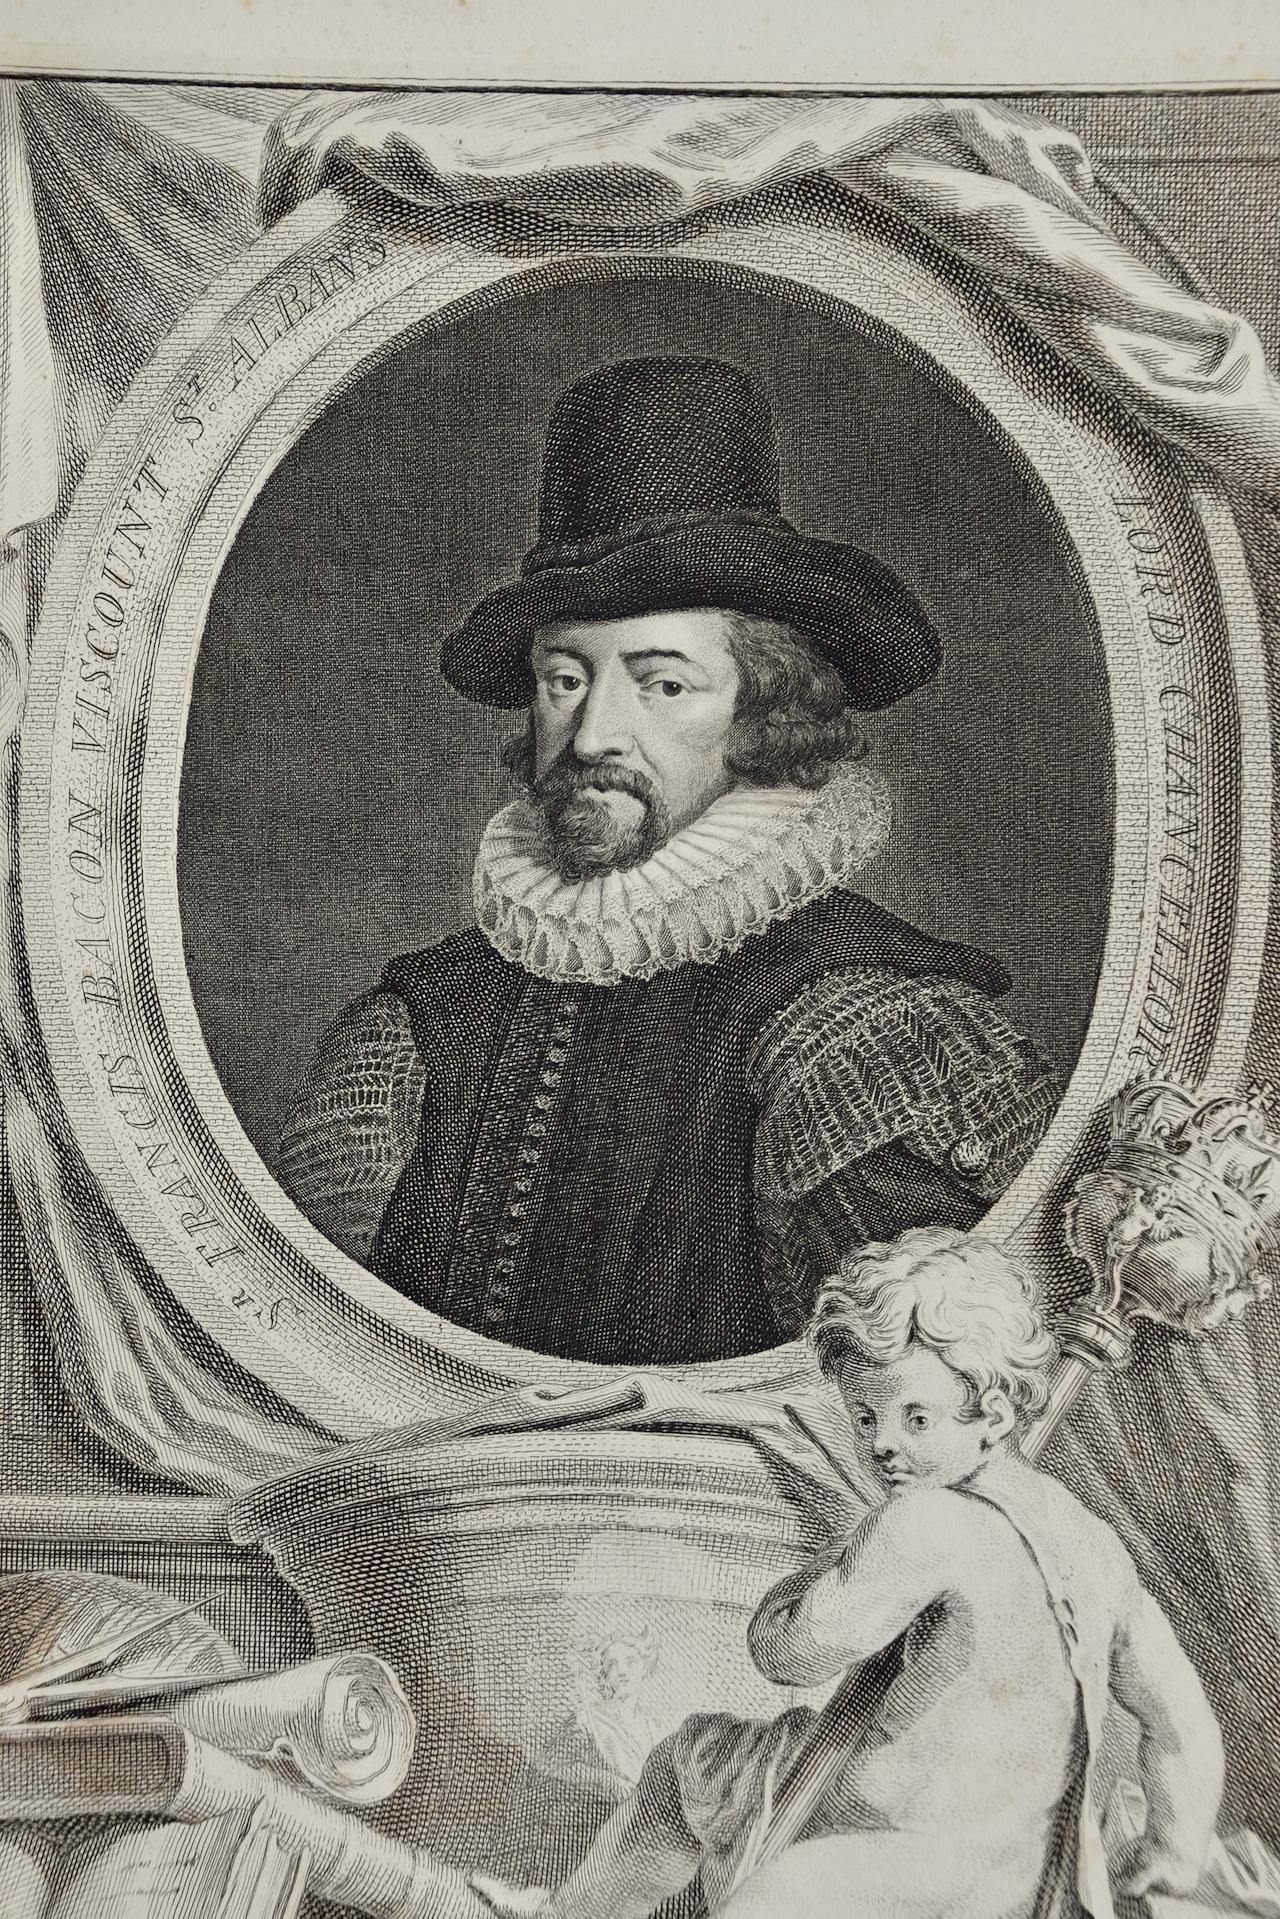 Sir Francis Bacon: 18th C. Portrait of Philosopher, Scientist, Author, Statesman - Print by Jacobus Houbraken